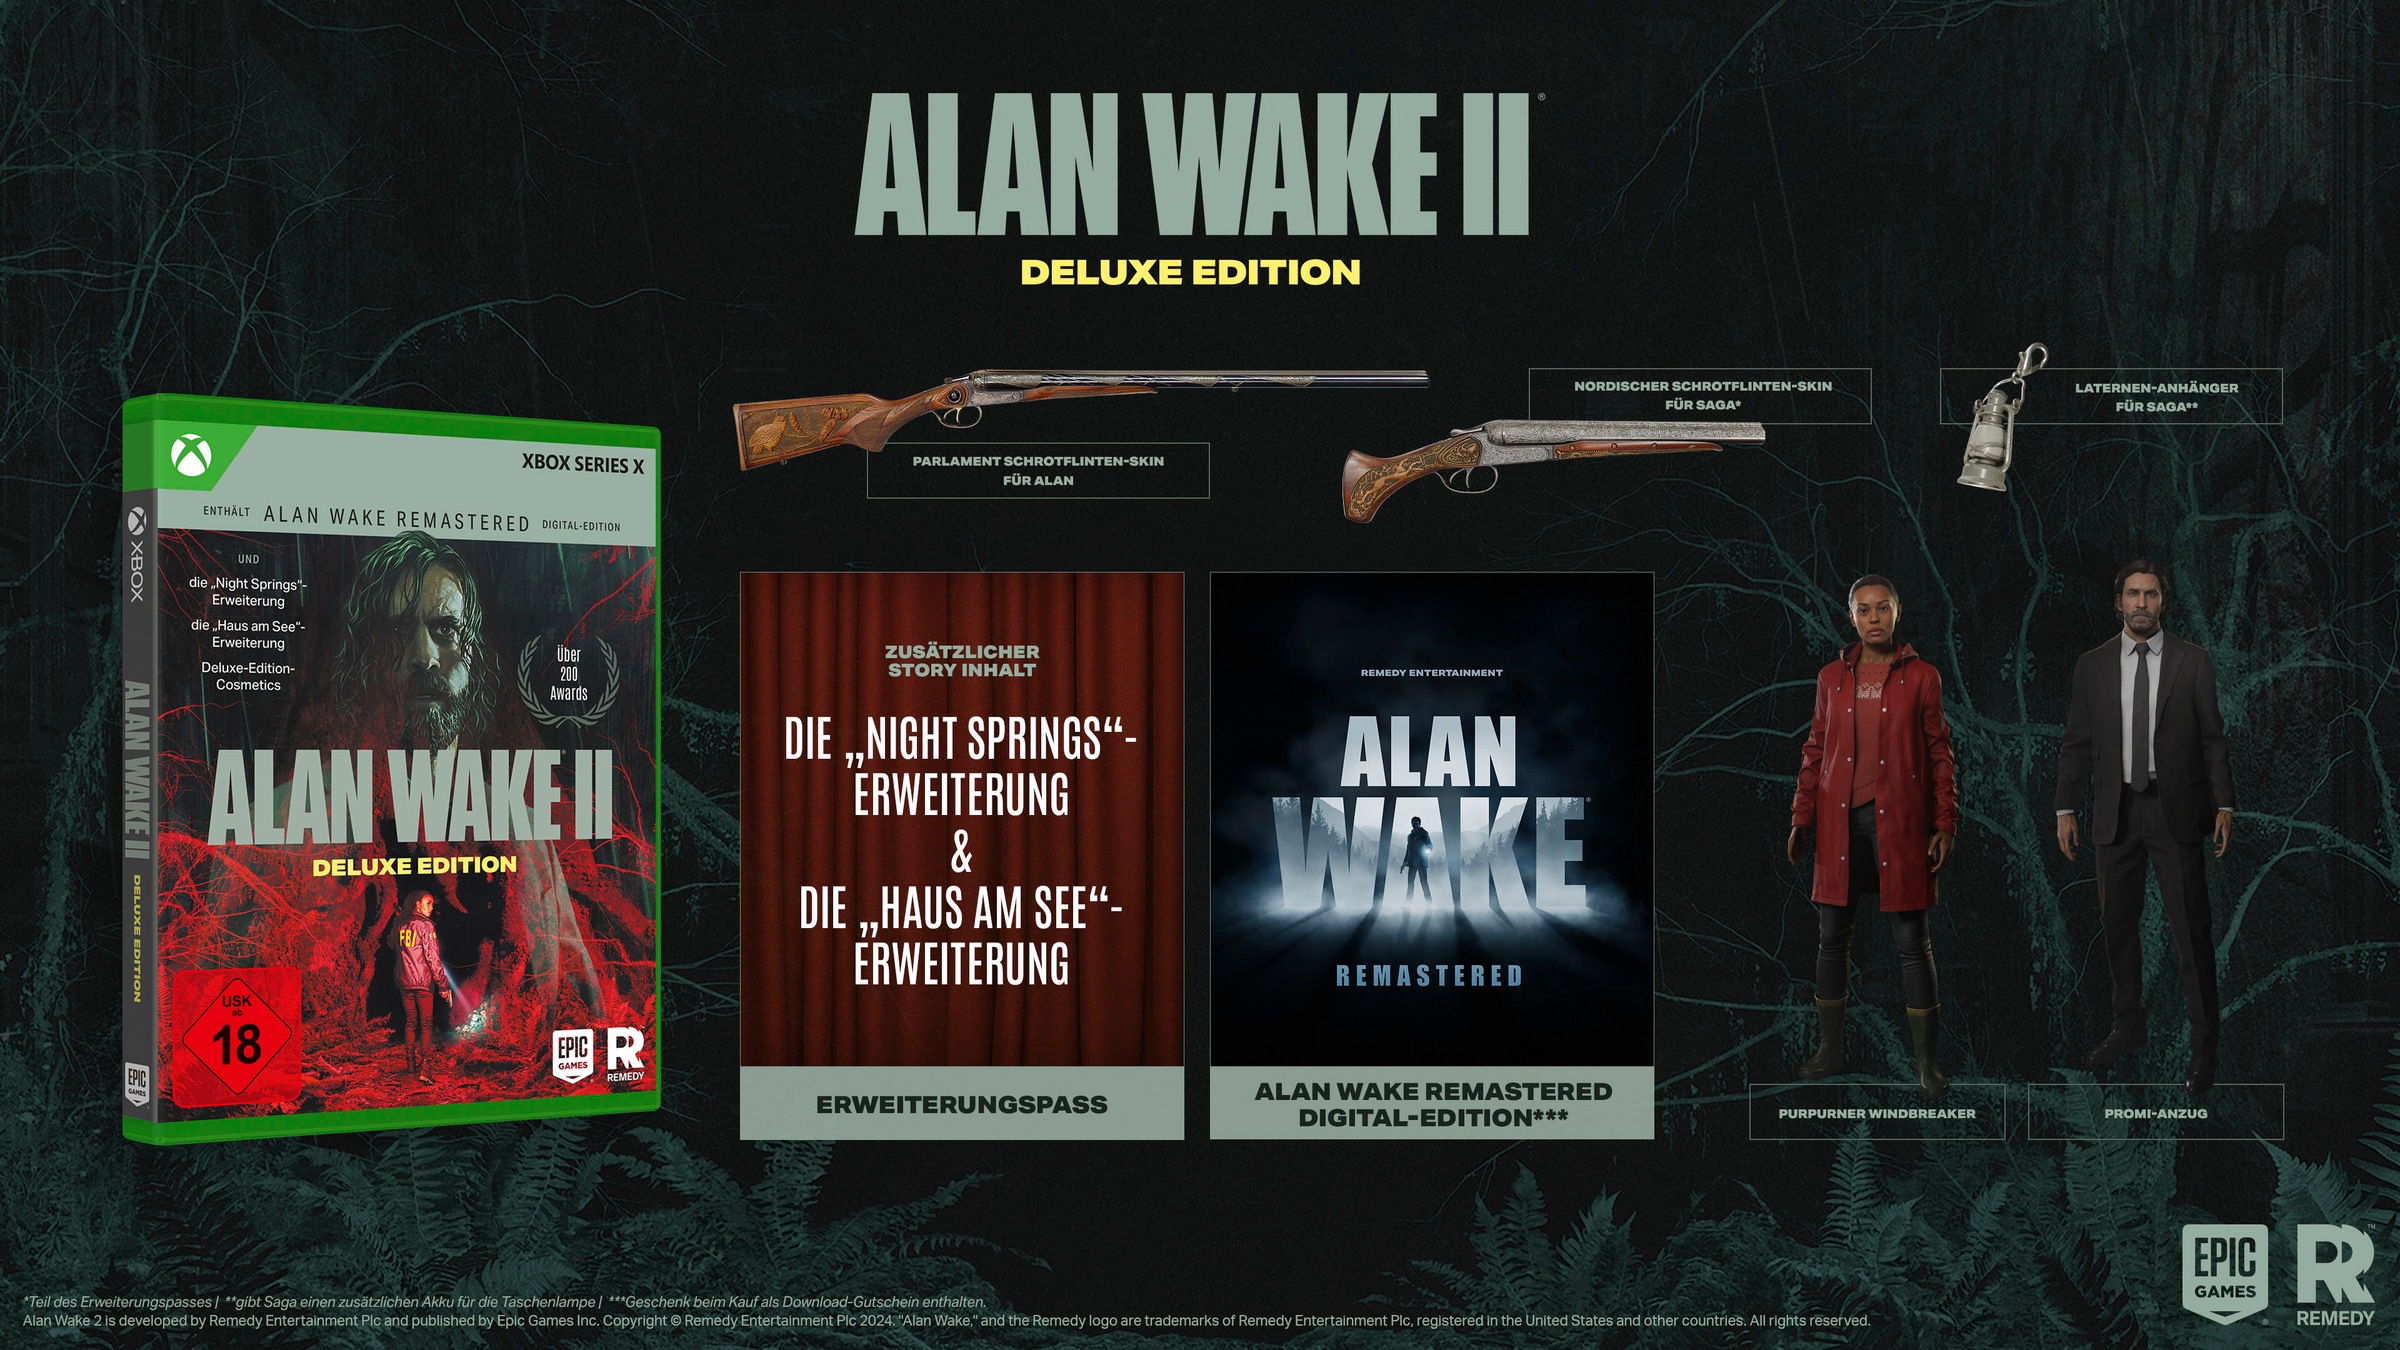 Spielesoftware »Alan Wake 2 Deluxe Edition«, Xbox Series X